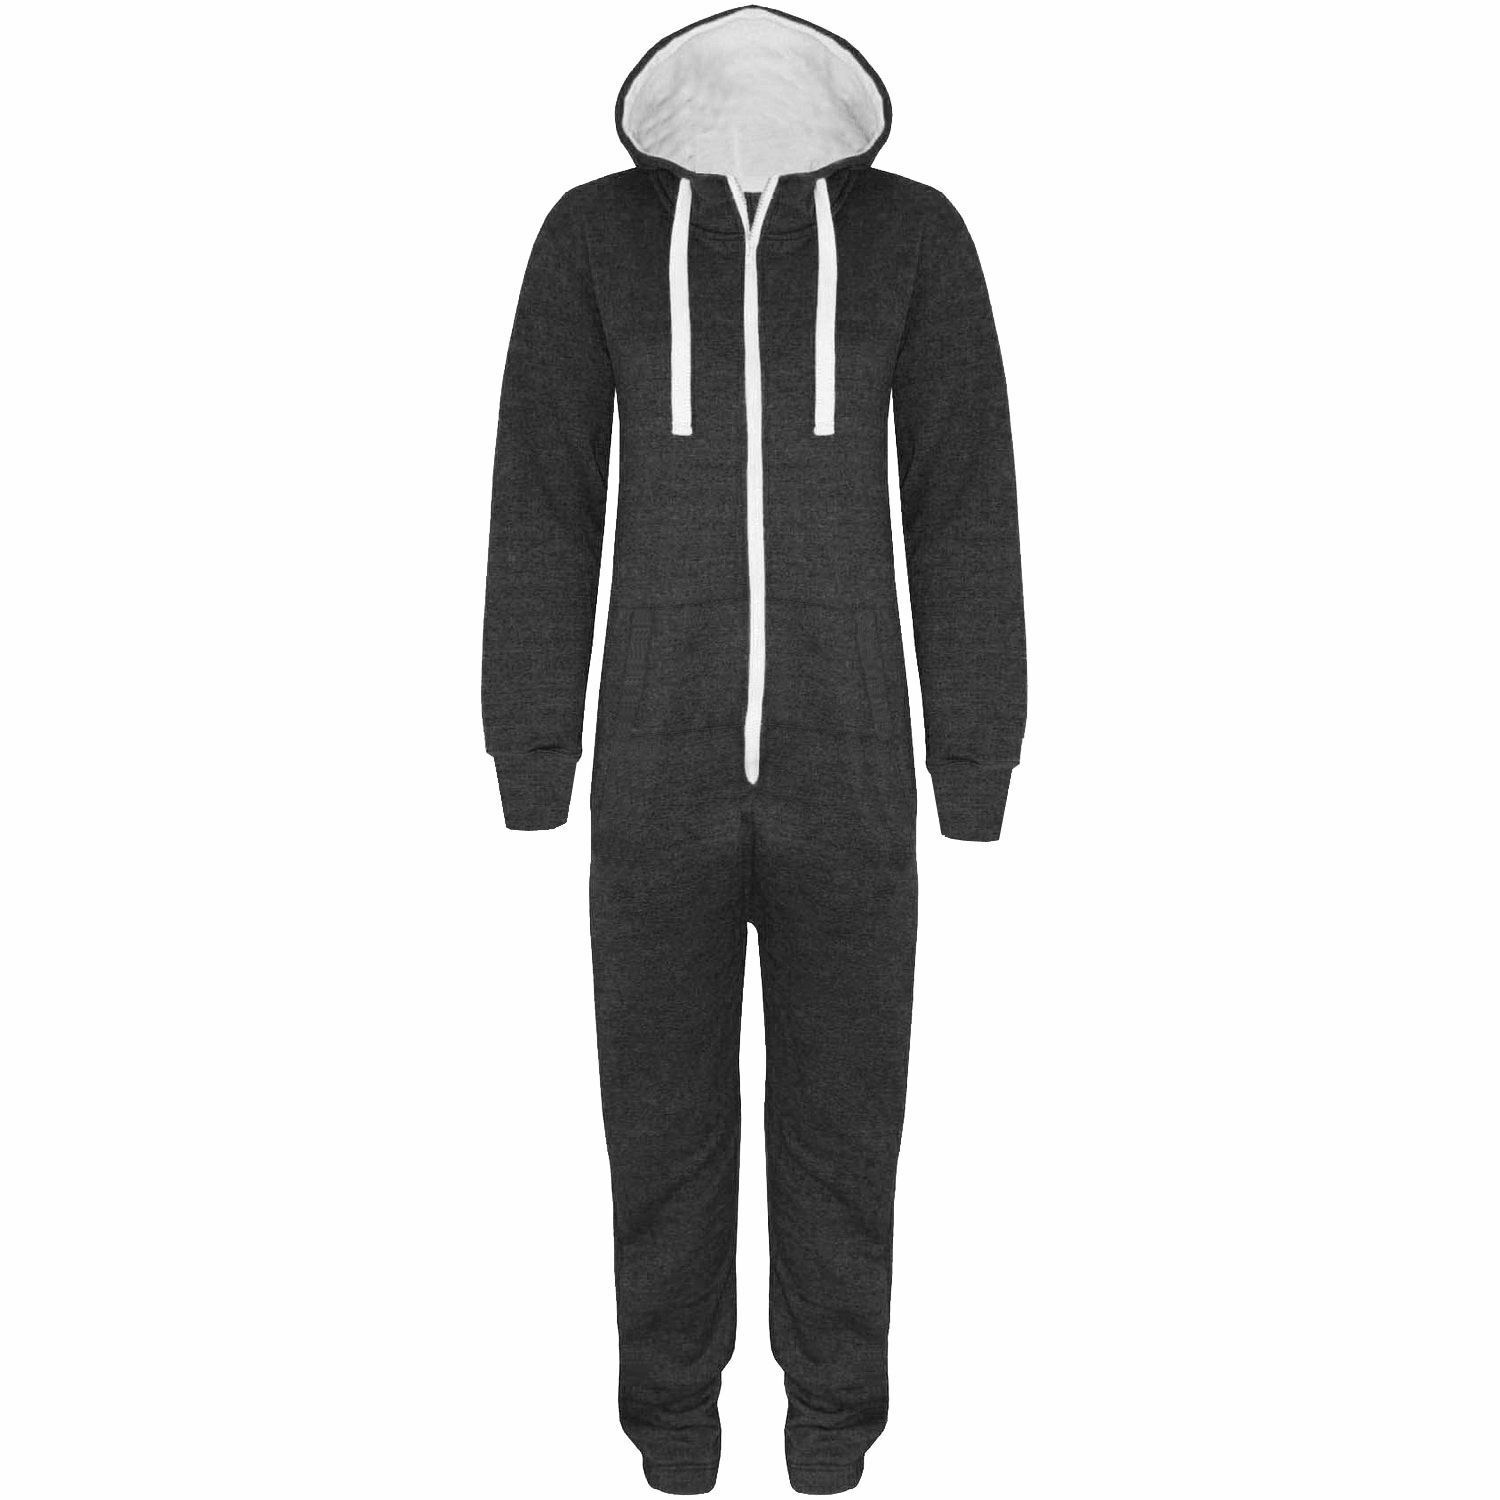 Plain Charcoal Grey Onesie With Blue Design. These Have A White Cotton Lined Hood With The Rest Of The Onesie Being Fleece.They Have Elasticated Ribbed Cuffs And Front Pockets.The Zip At The Front Goes From The Neck To Just Below The Waist. These Are A Lose Fit Onesie. Sizes 2XL To 4XL Available.